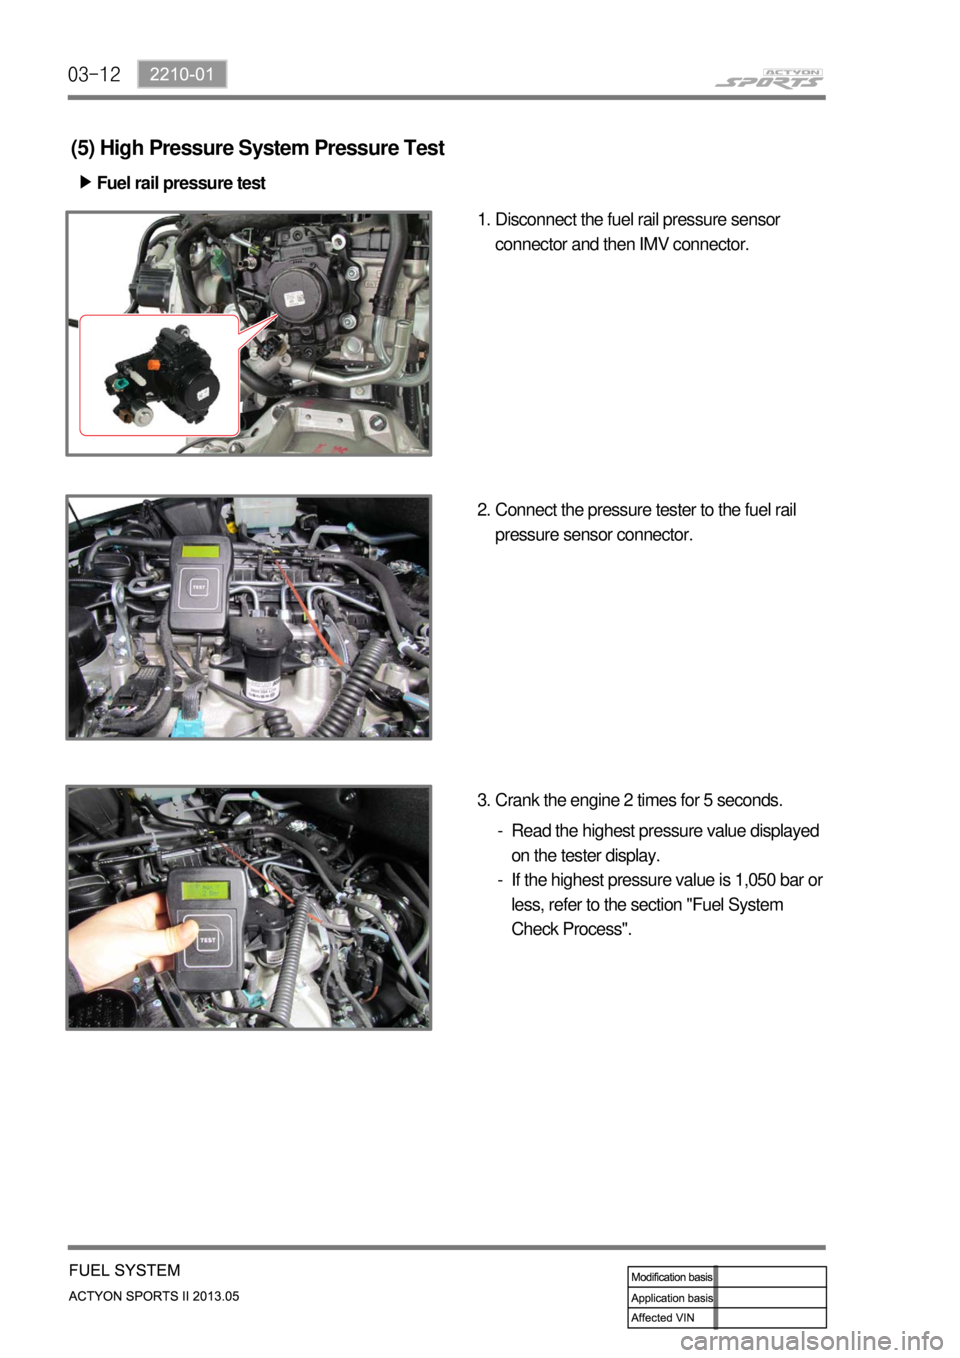 SSANGYONG NEW ACTYON SPORTS 2013  Service Manual 03-12
(5) High Pressure System Pressure Test
Fuel rail pressure test ▶
Disconnect the fuel rail pressure sensor 
connector and then IMV connector. 1.
Connect the pressure tester to the fuel rail 
pr